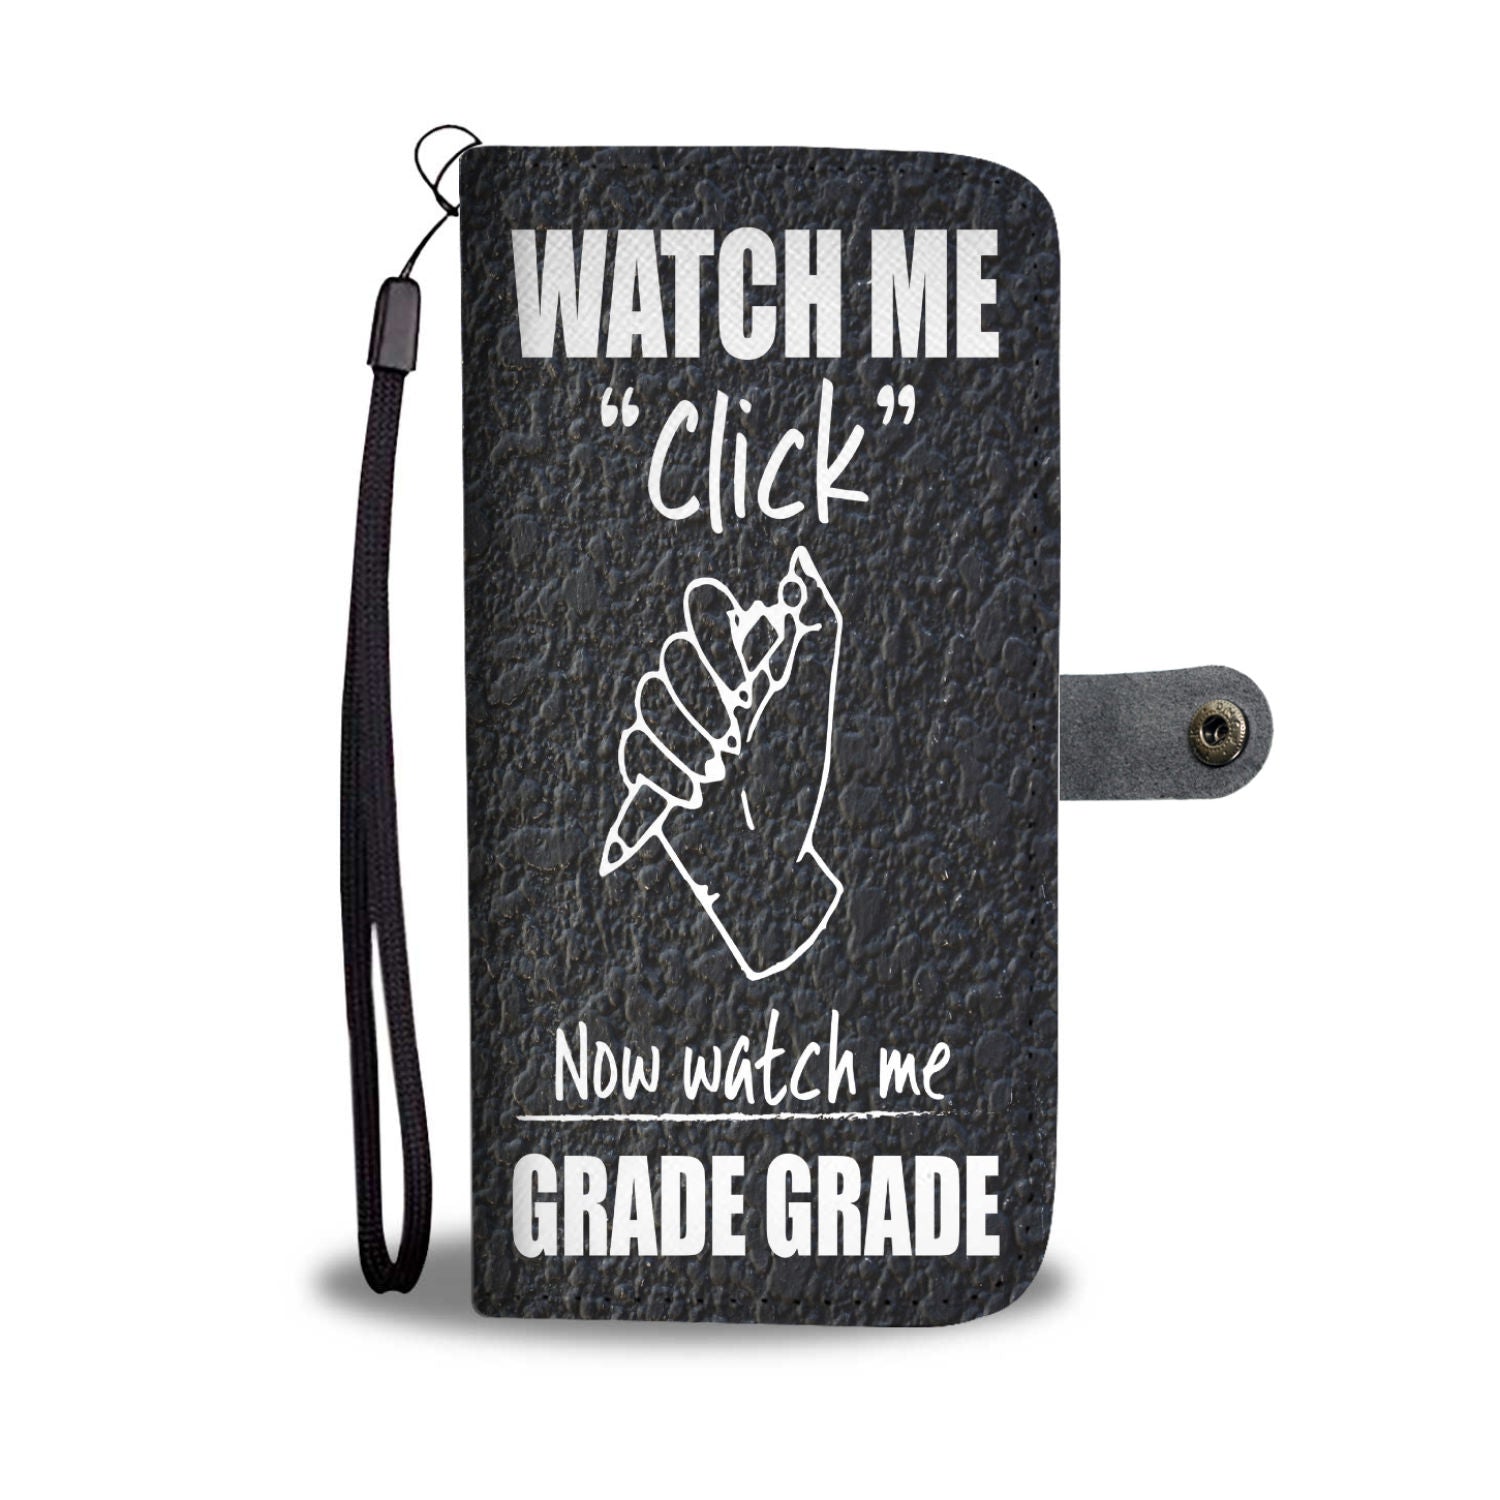 Custom Phone Wallet Available For All Phone Models Watch Me Click Now Watch Me Grade Grade Phone Wallet